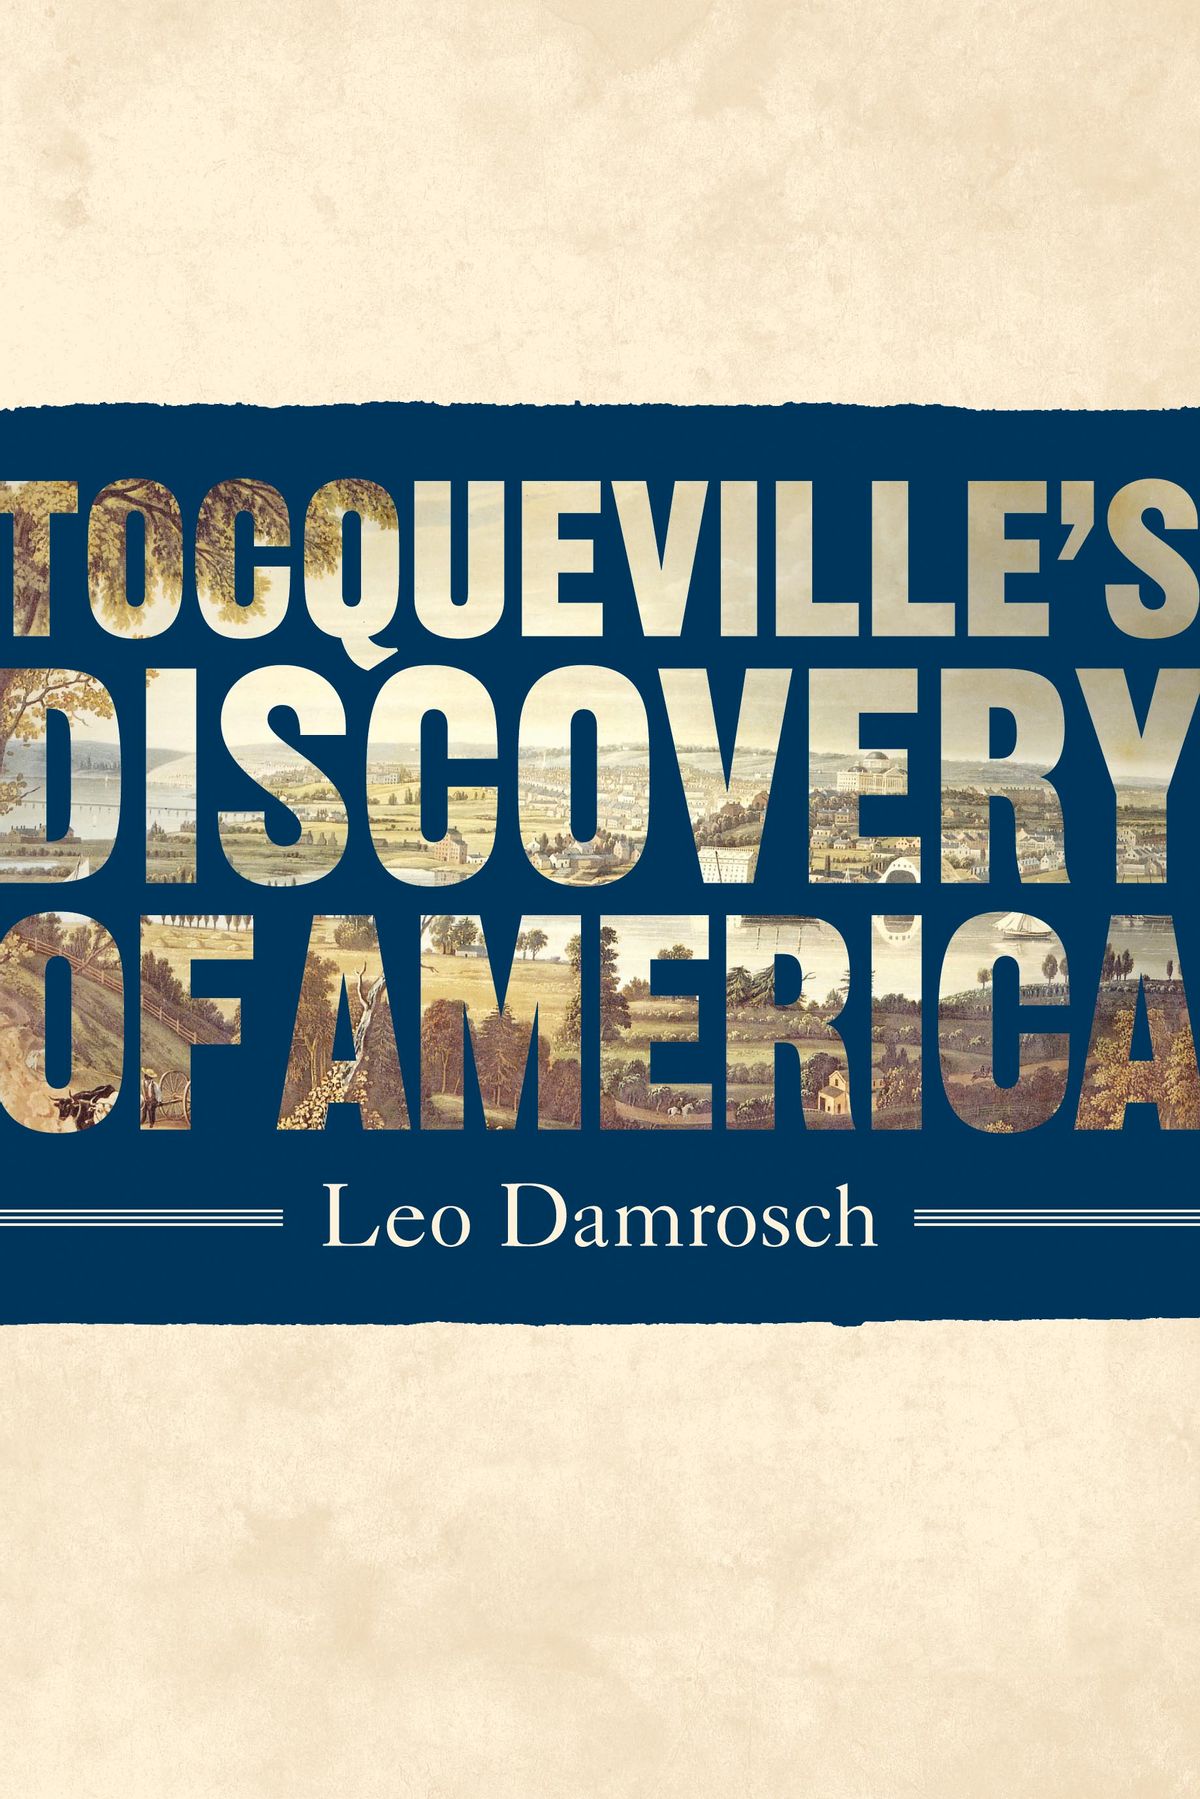 "Tocqueville's Discovery of America," by Leo Damrosch 